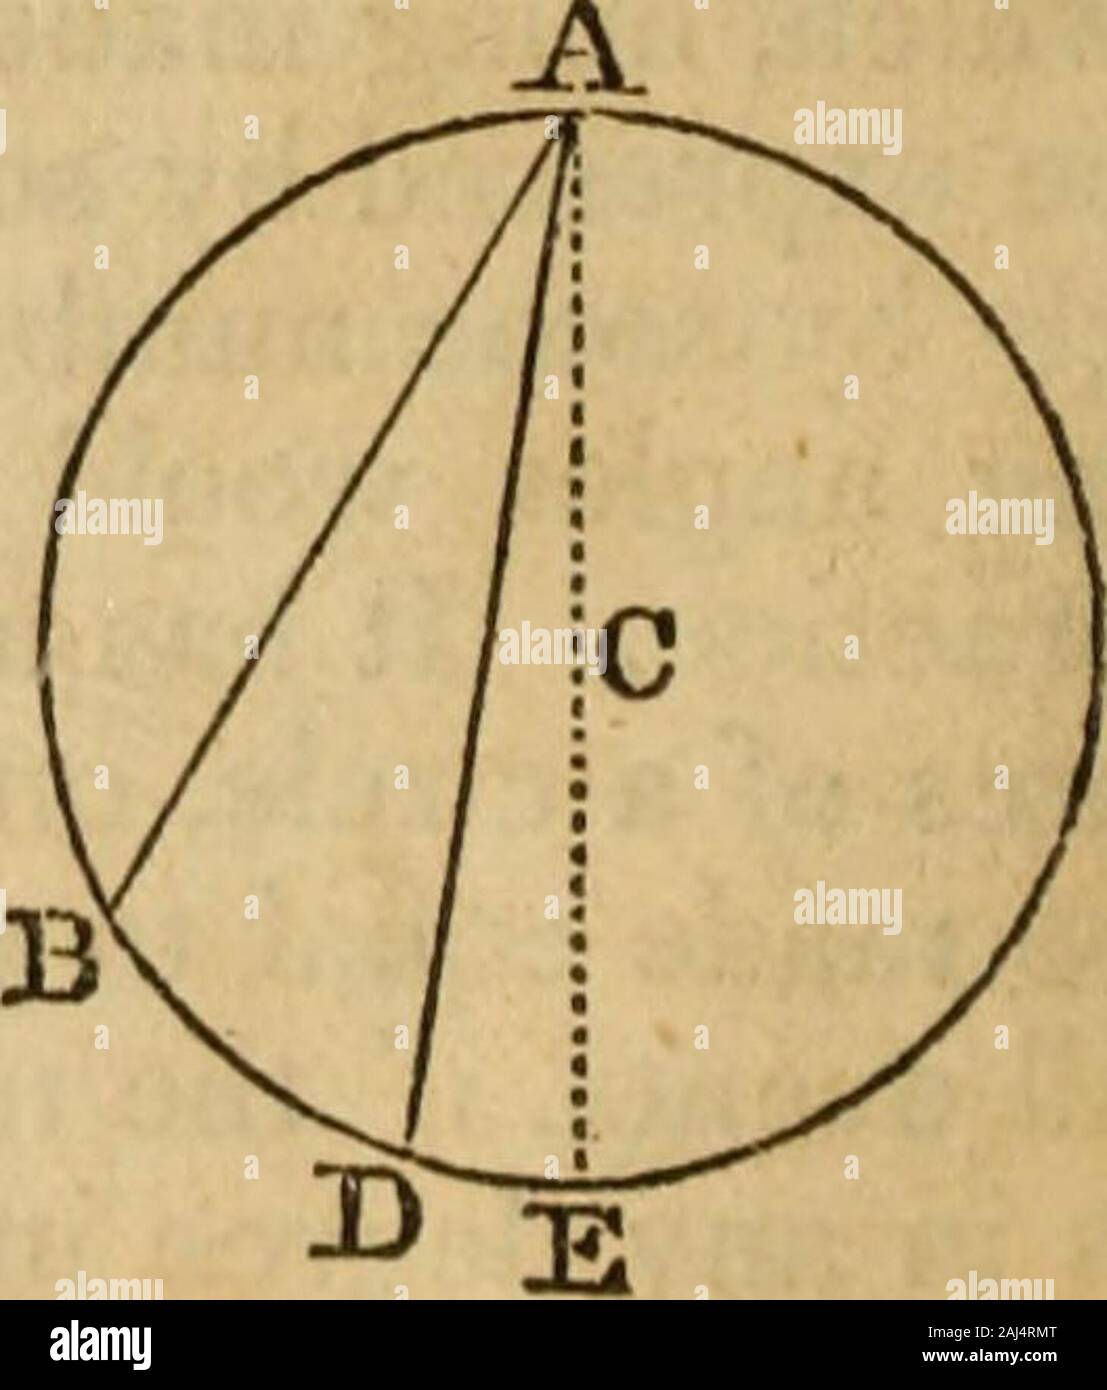 Elements of geometry and trigonometry . ibed angle, and letus first suppose that the centre of the cir-cle lies within the angle BAD. Draw thediameter AE, and the radii CB, CD. The angle BCE, being exterior to thetriangle ABC, is equal to the sum of thetwo interior angles CAB, ABC (Book I.Prop. XXV. Cor. 6.) : but the triangle BACbeing isosceles, the angle CAB is equal toABC : hence the angle BCE is double of BAC. S.ince BCE liesat the centre, it is measured by the arc BE ; hence BAC will bemeasured by the half of BE. For a like reason, the angle CADwill be measured by the half of ED ; hence B Stock Photo